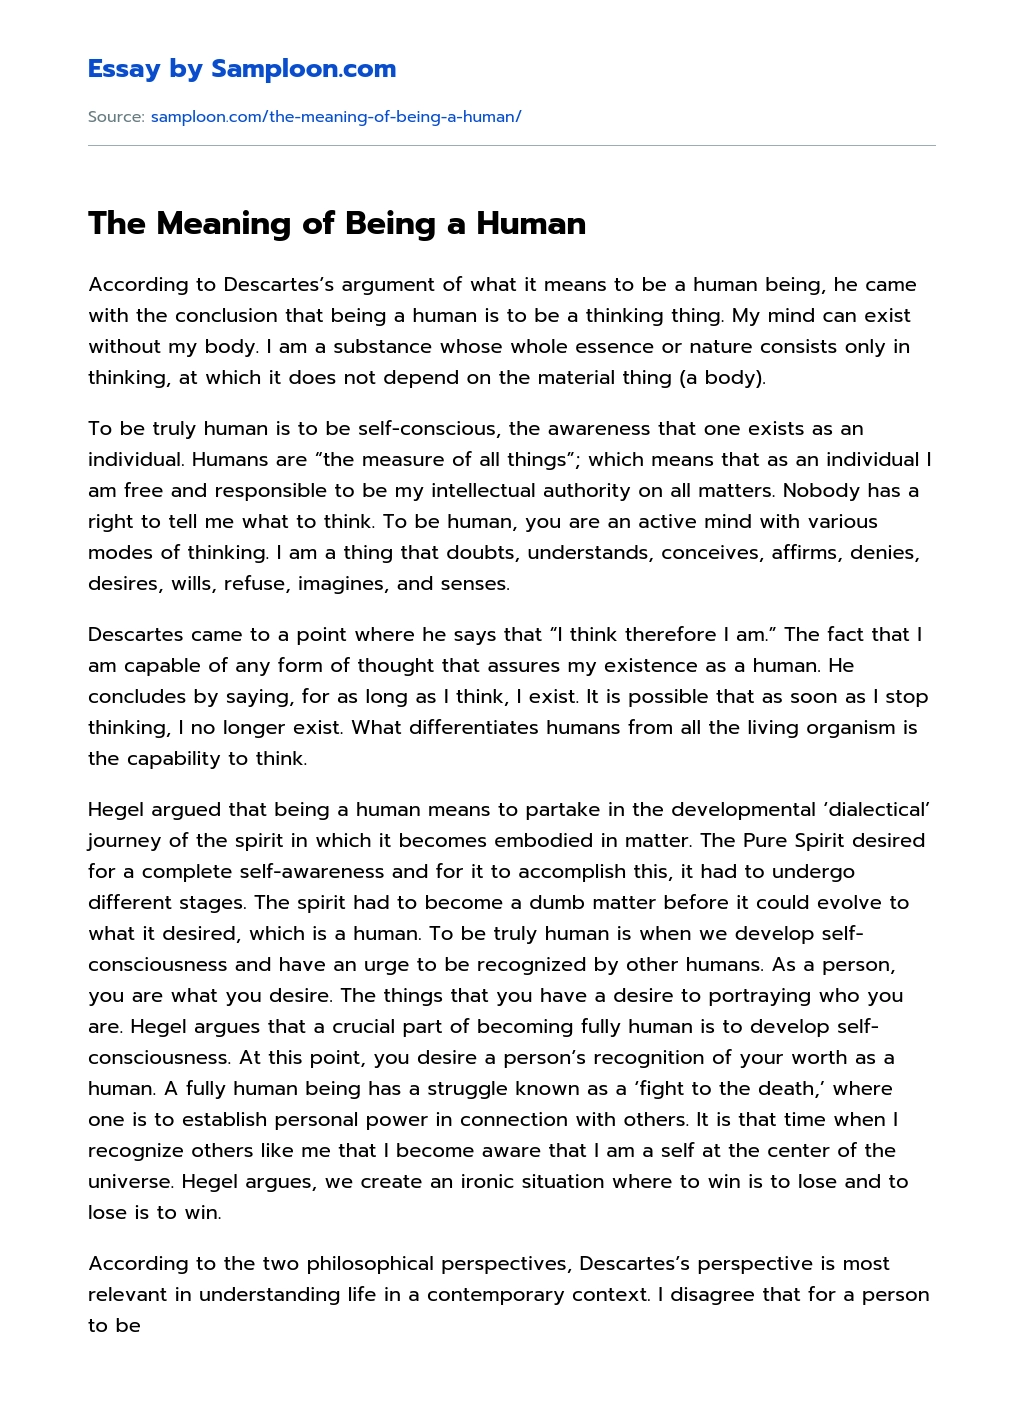 The Meaning of Being a Human essay